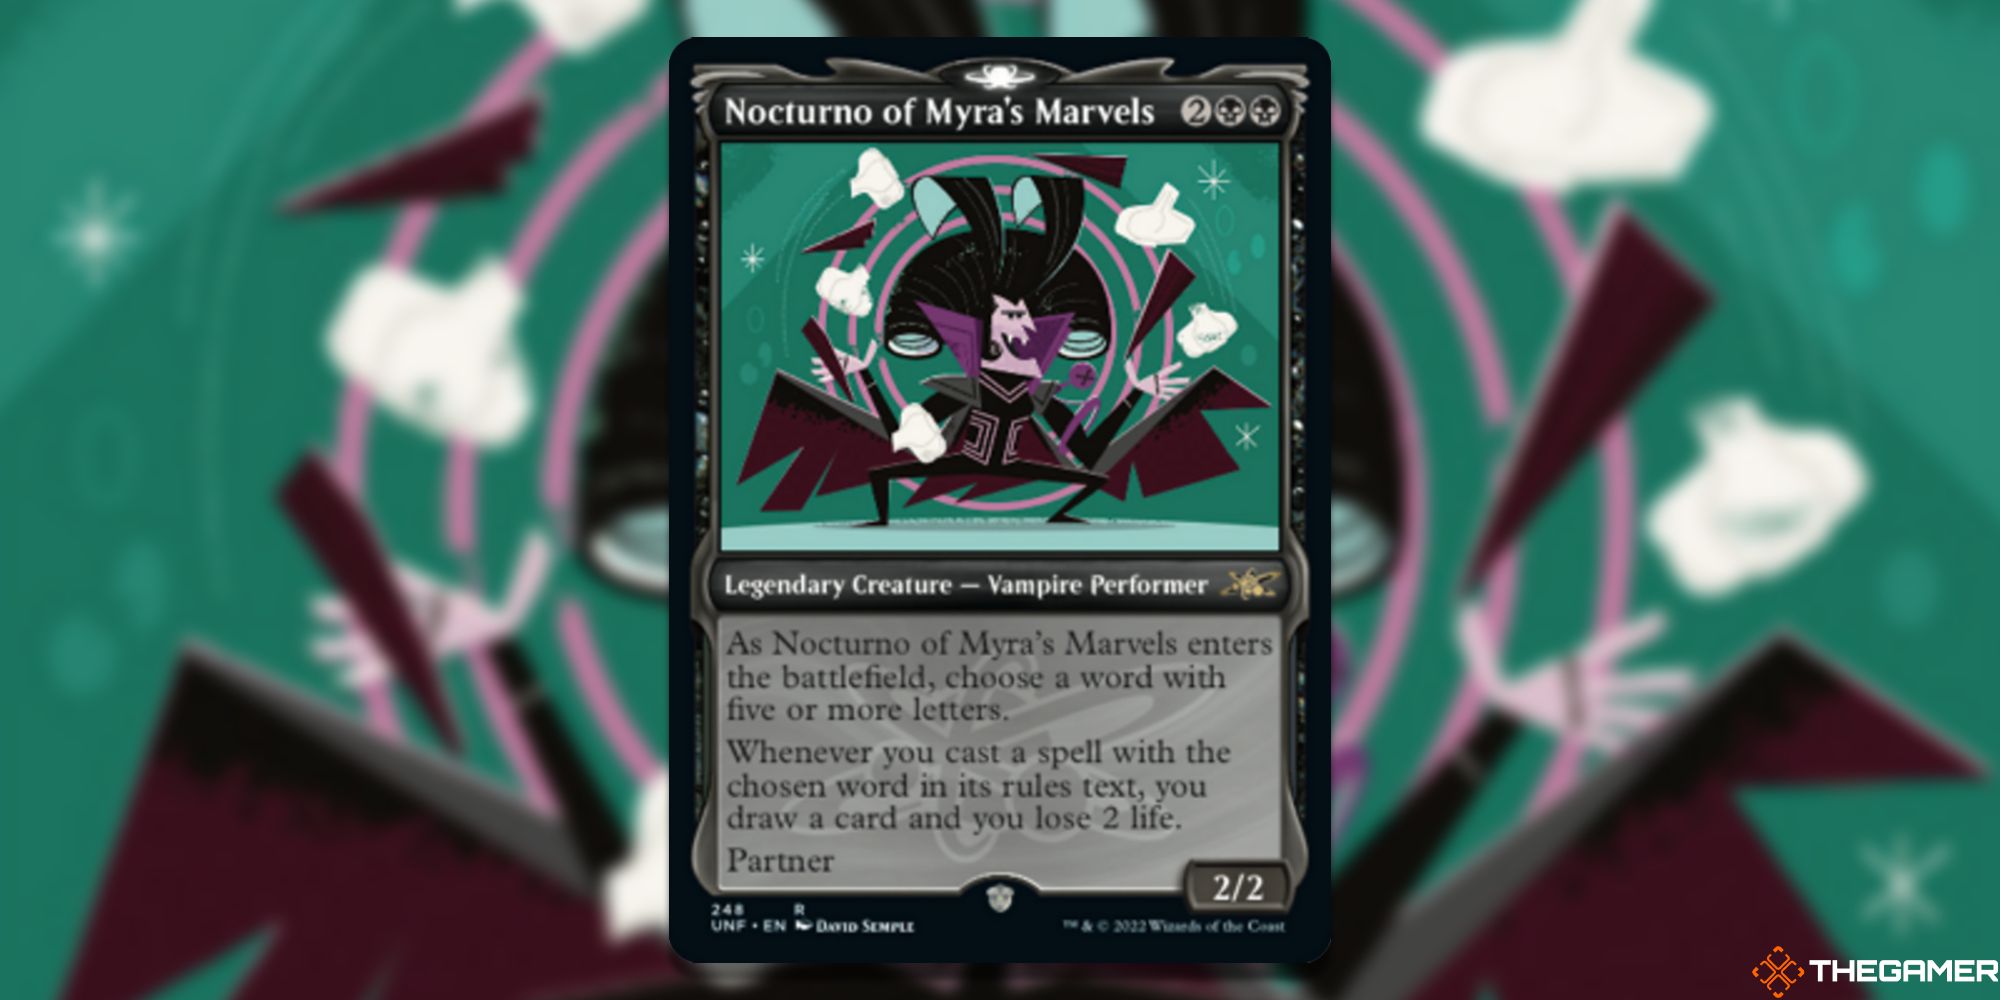 The card Nocturno of Myra's Marvels from Magic: the Gathering.